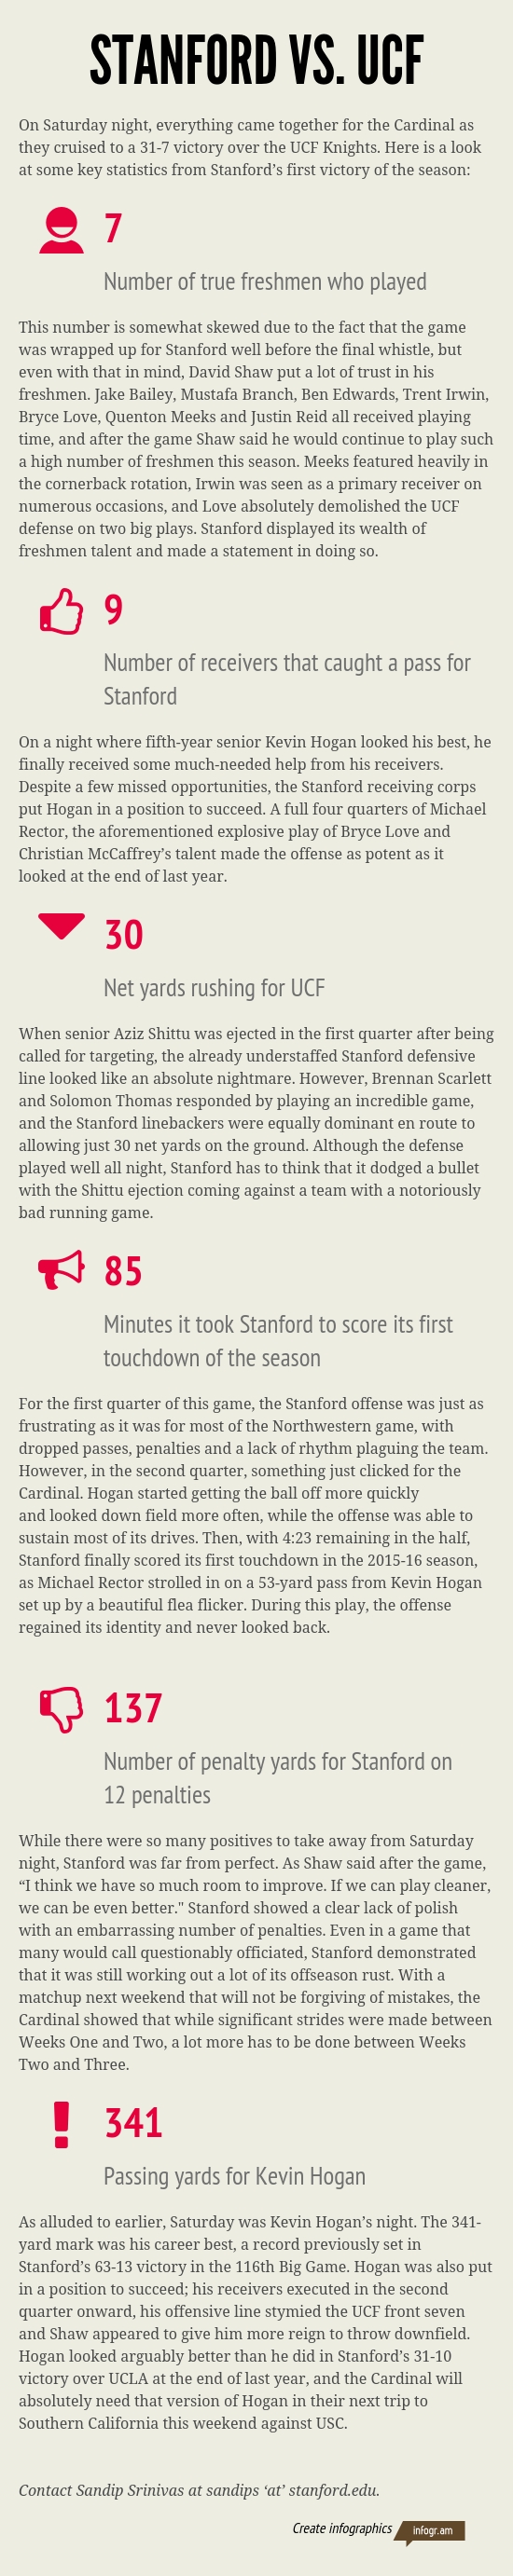 By the numbers: Stanford vs. UCF